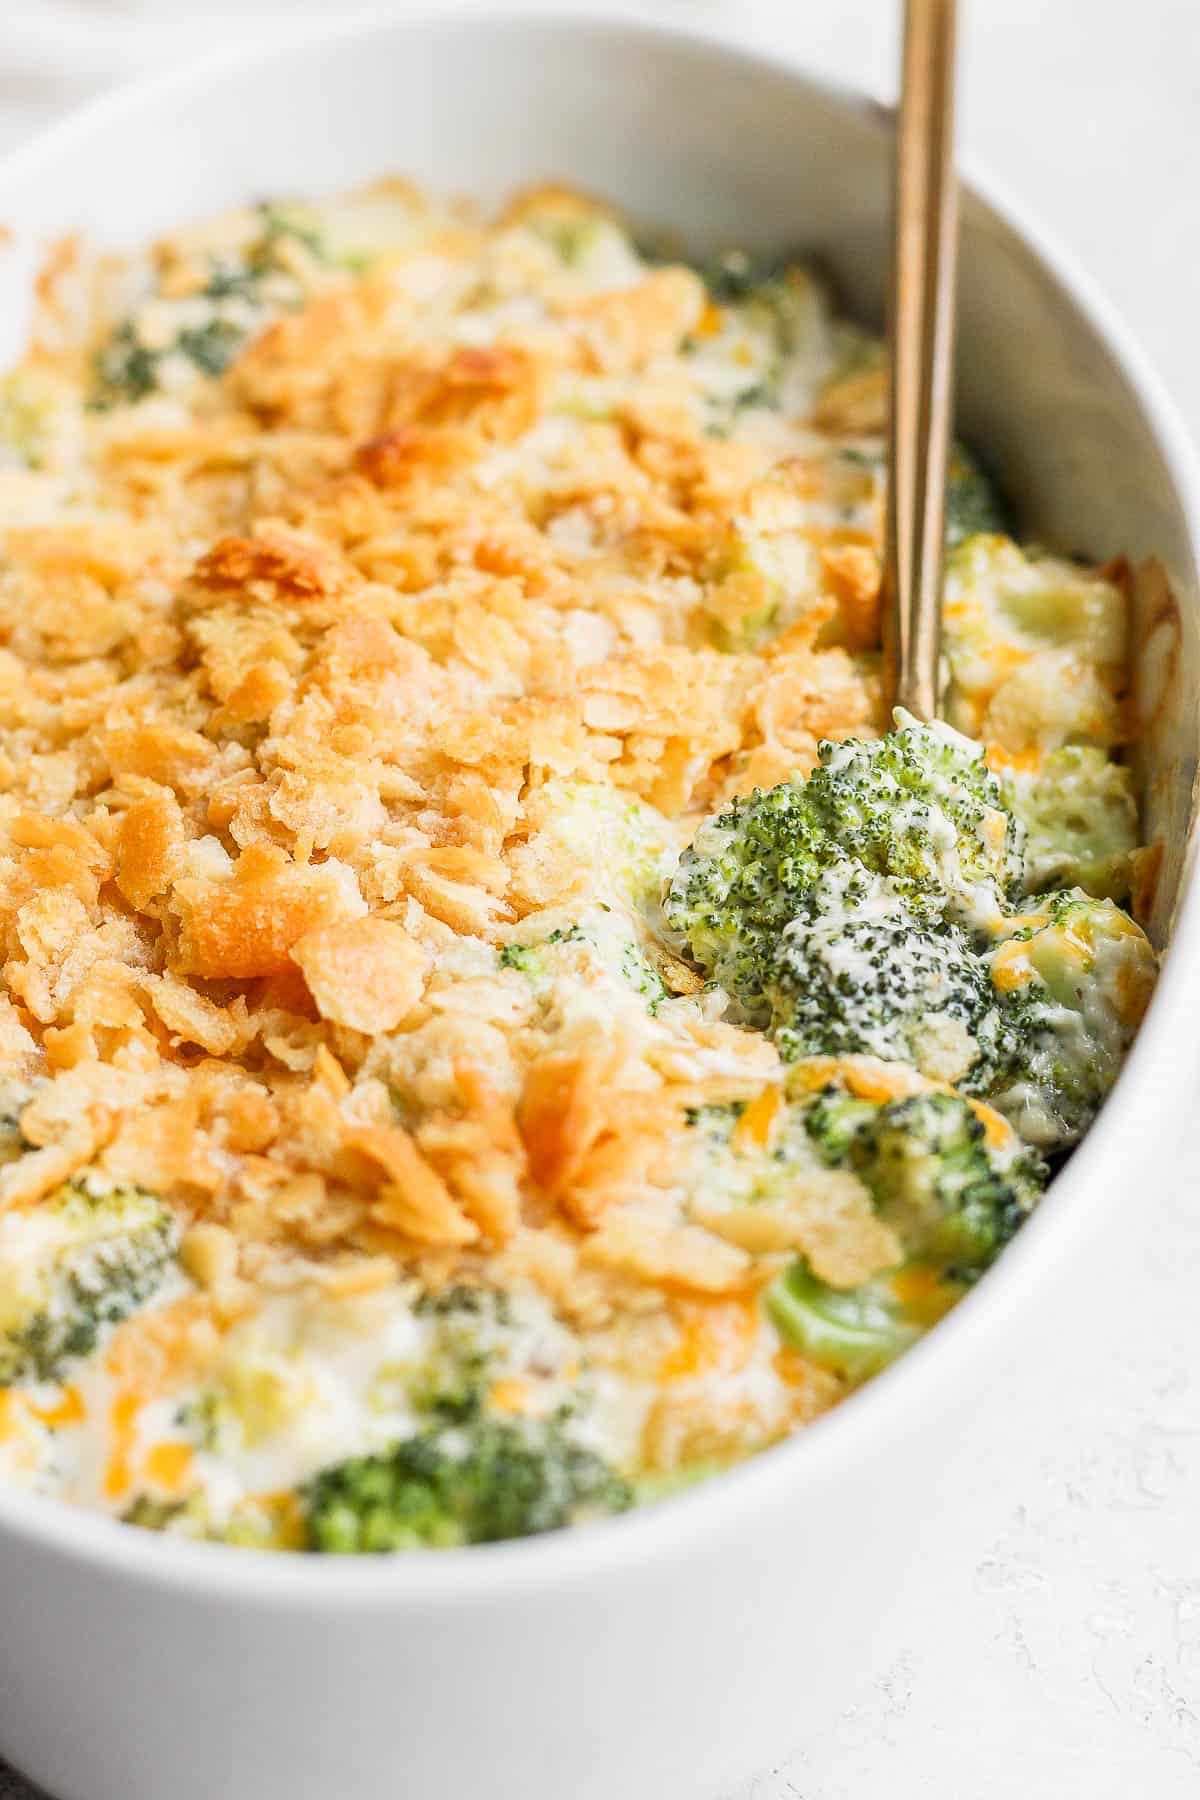 A close up image of the baked broccoli casserole with a spoon pulling out a small section to show a piece of broccoli coated in the cream mixture. 